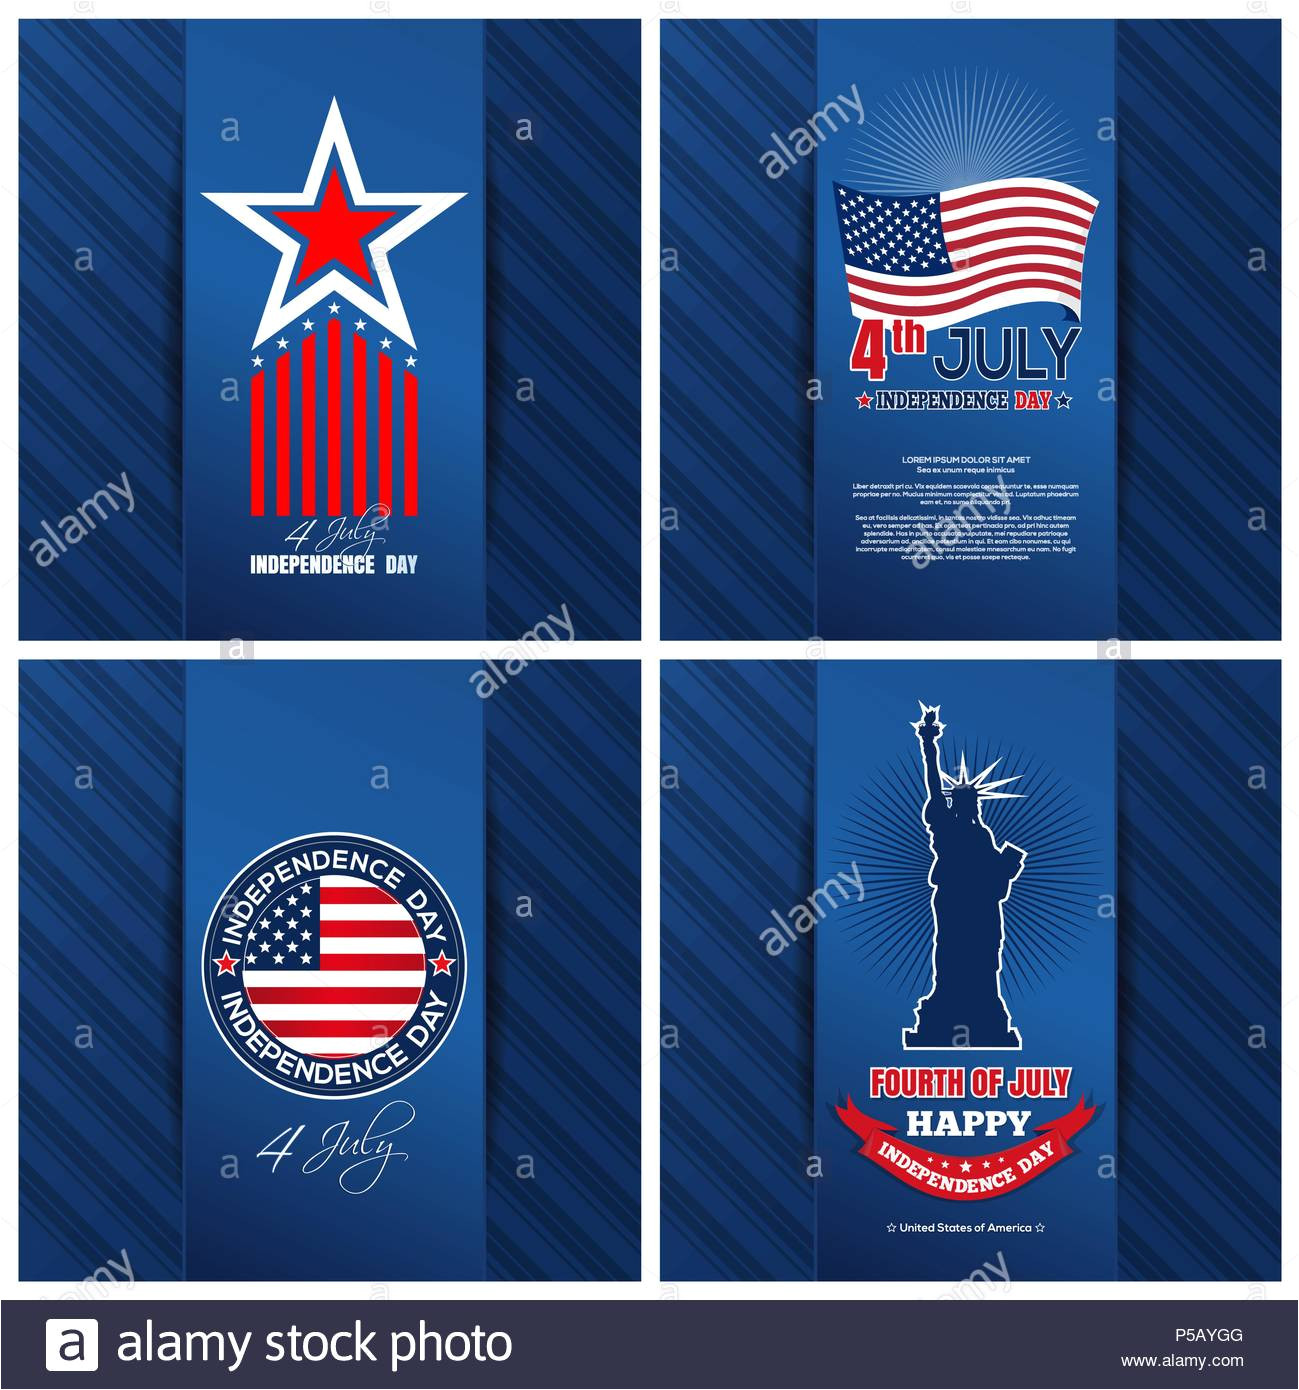 greeting cards set for the united states independence day 4th of july fourth of july holiday backgrounds collection for us independence day happy p5aygg jpg